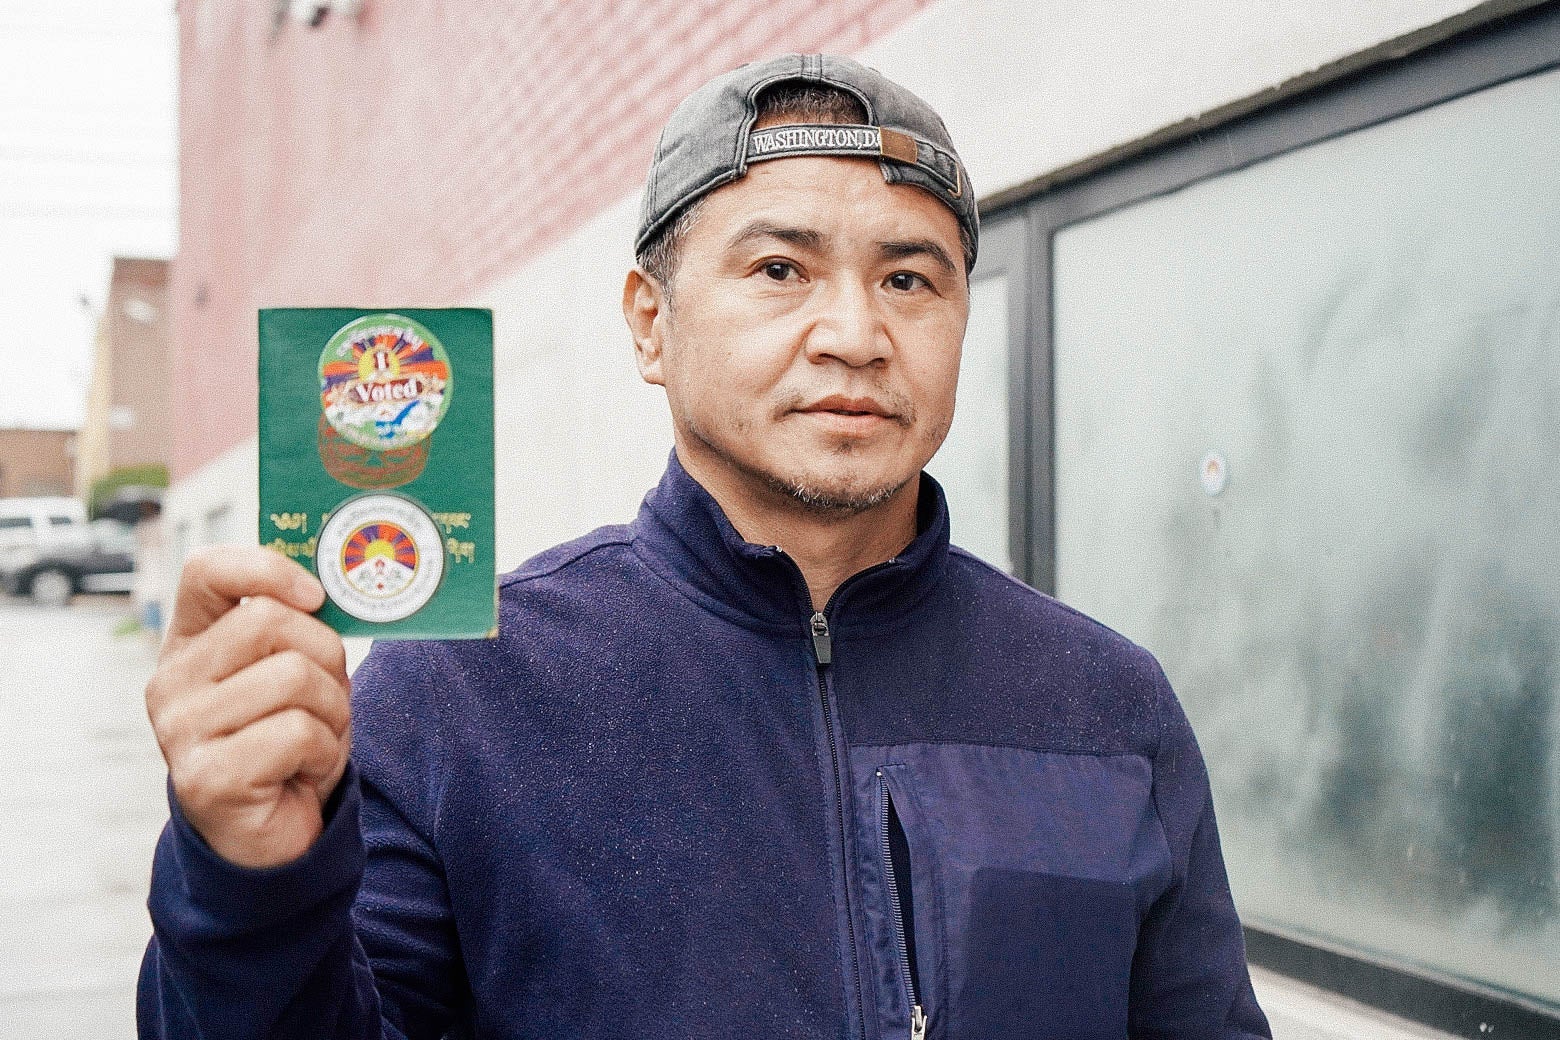 A man holds up a card showing he voted.